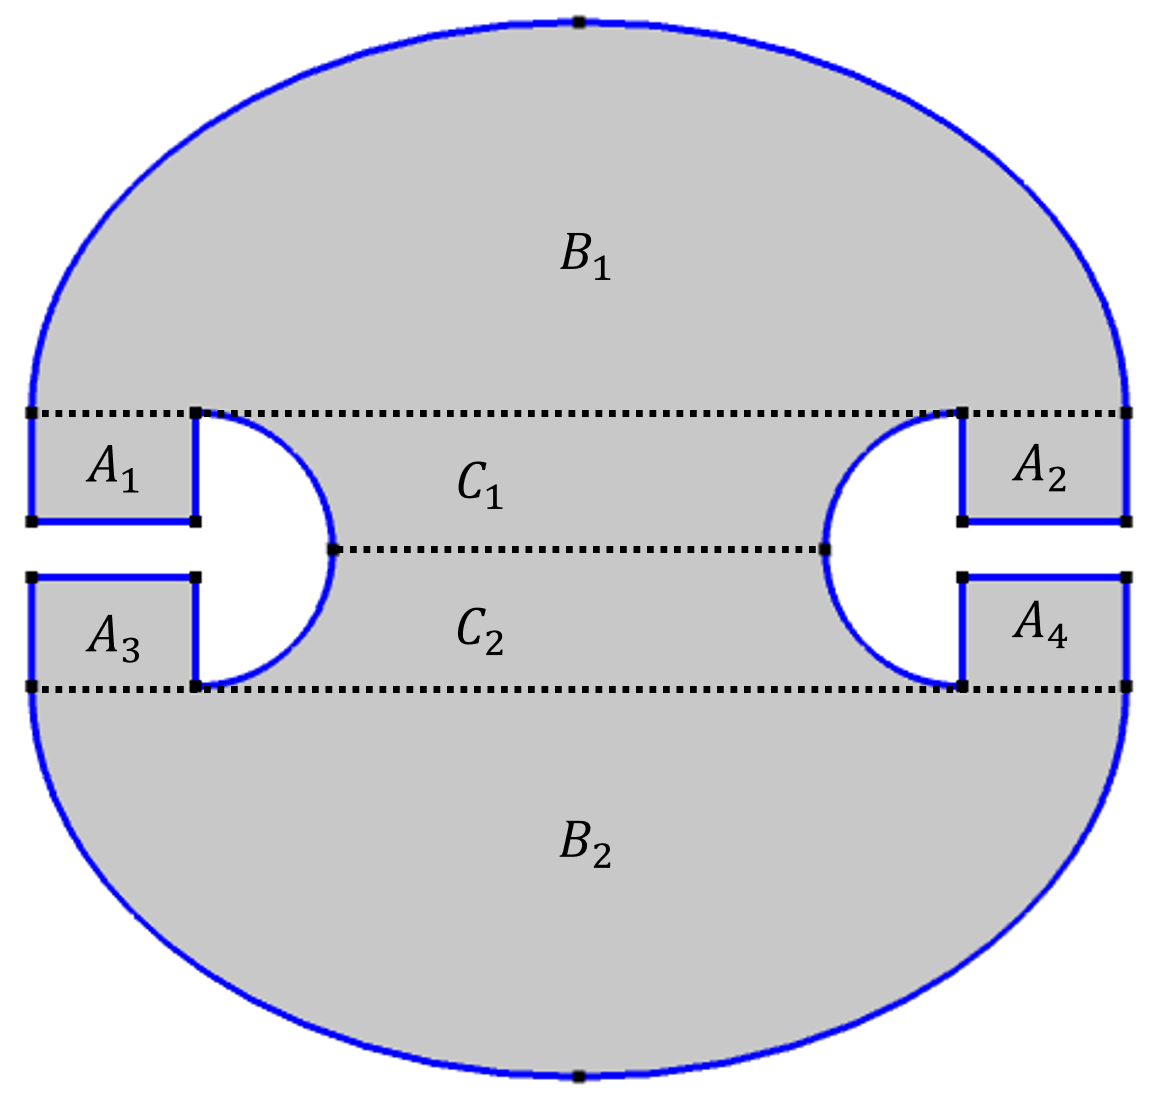 A figure depicting the Penrose unilluminable room divide into different regions.